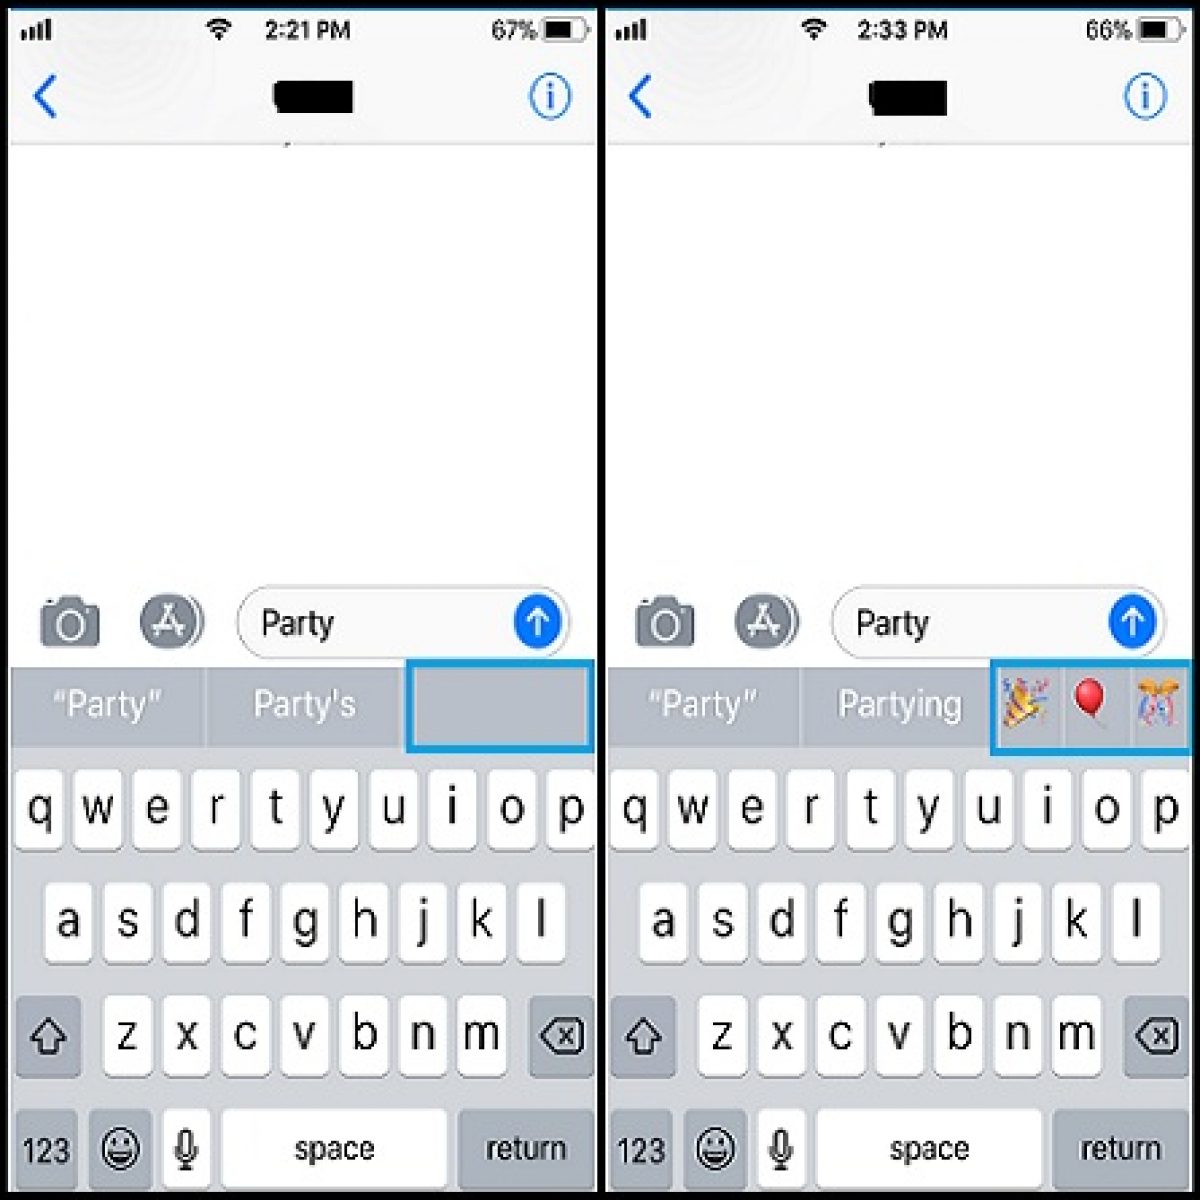 How To Fix Missing Emoji Suggestions From The Ios Predictive Keyboard